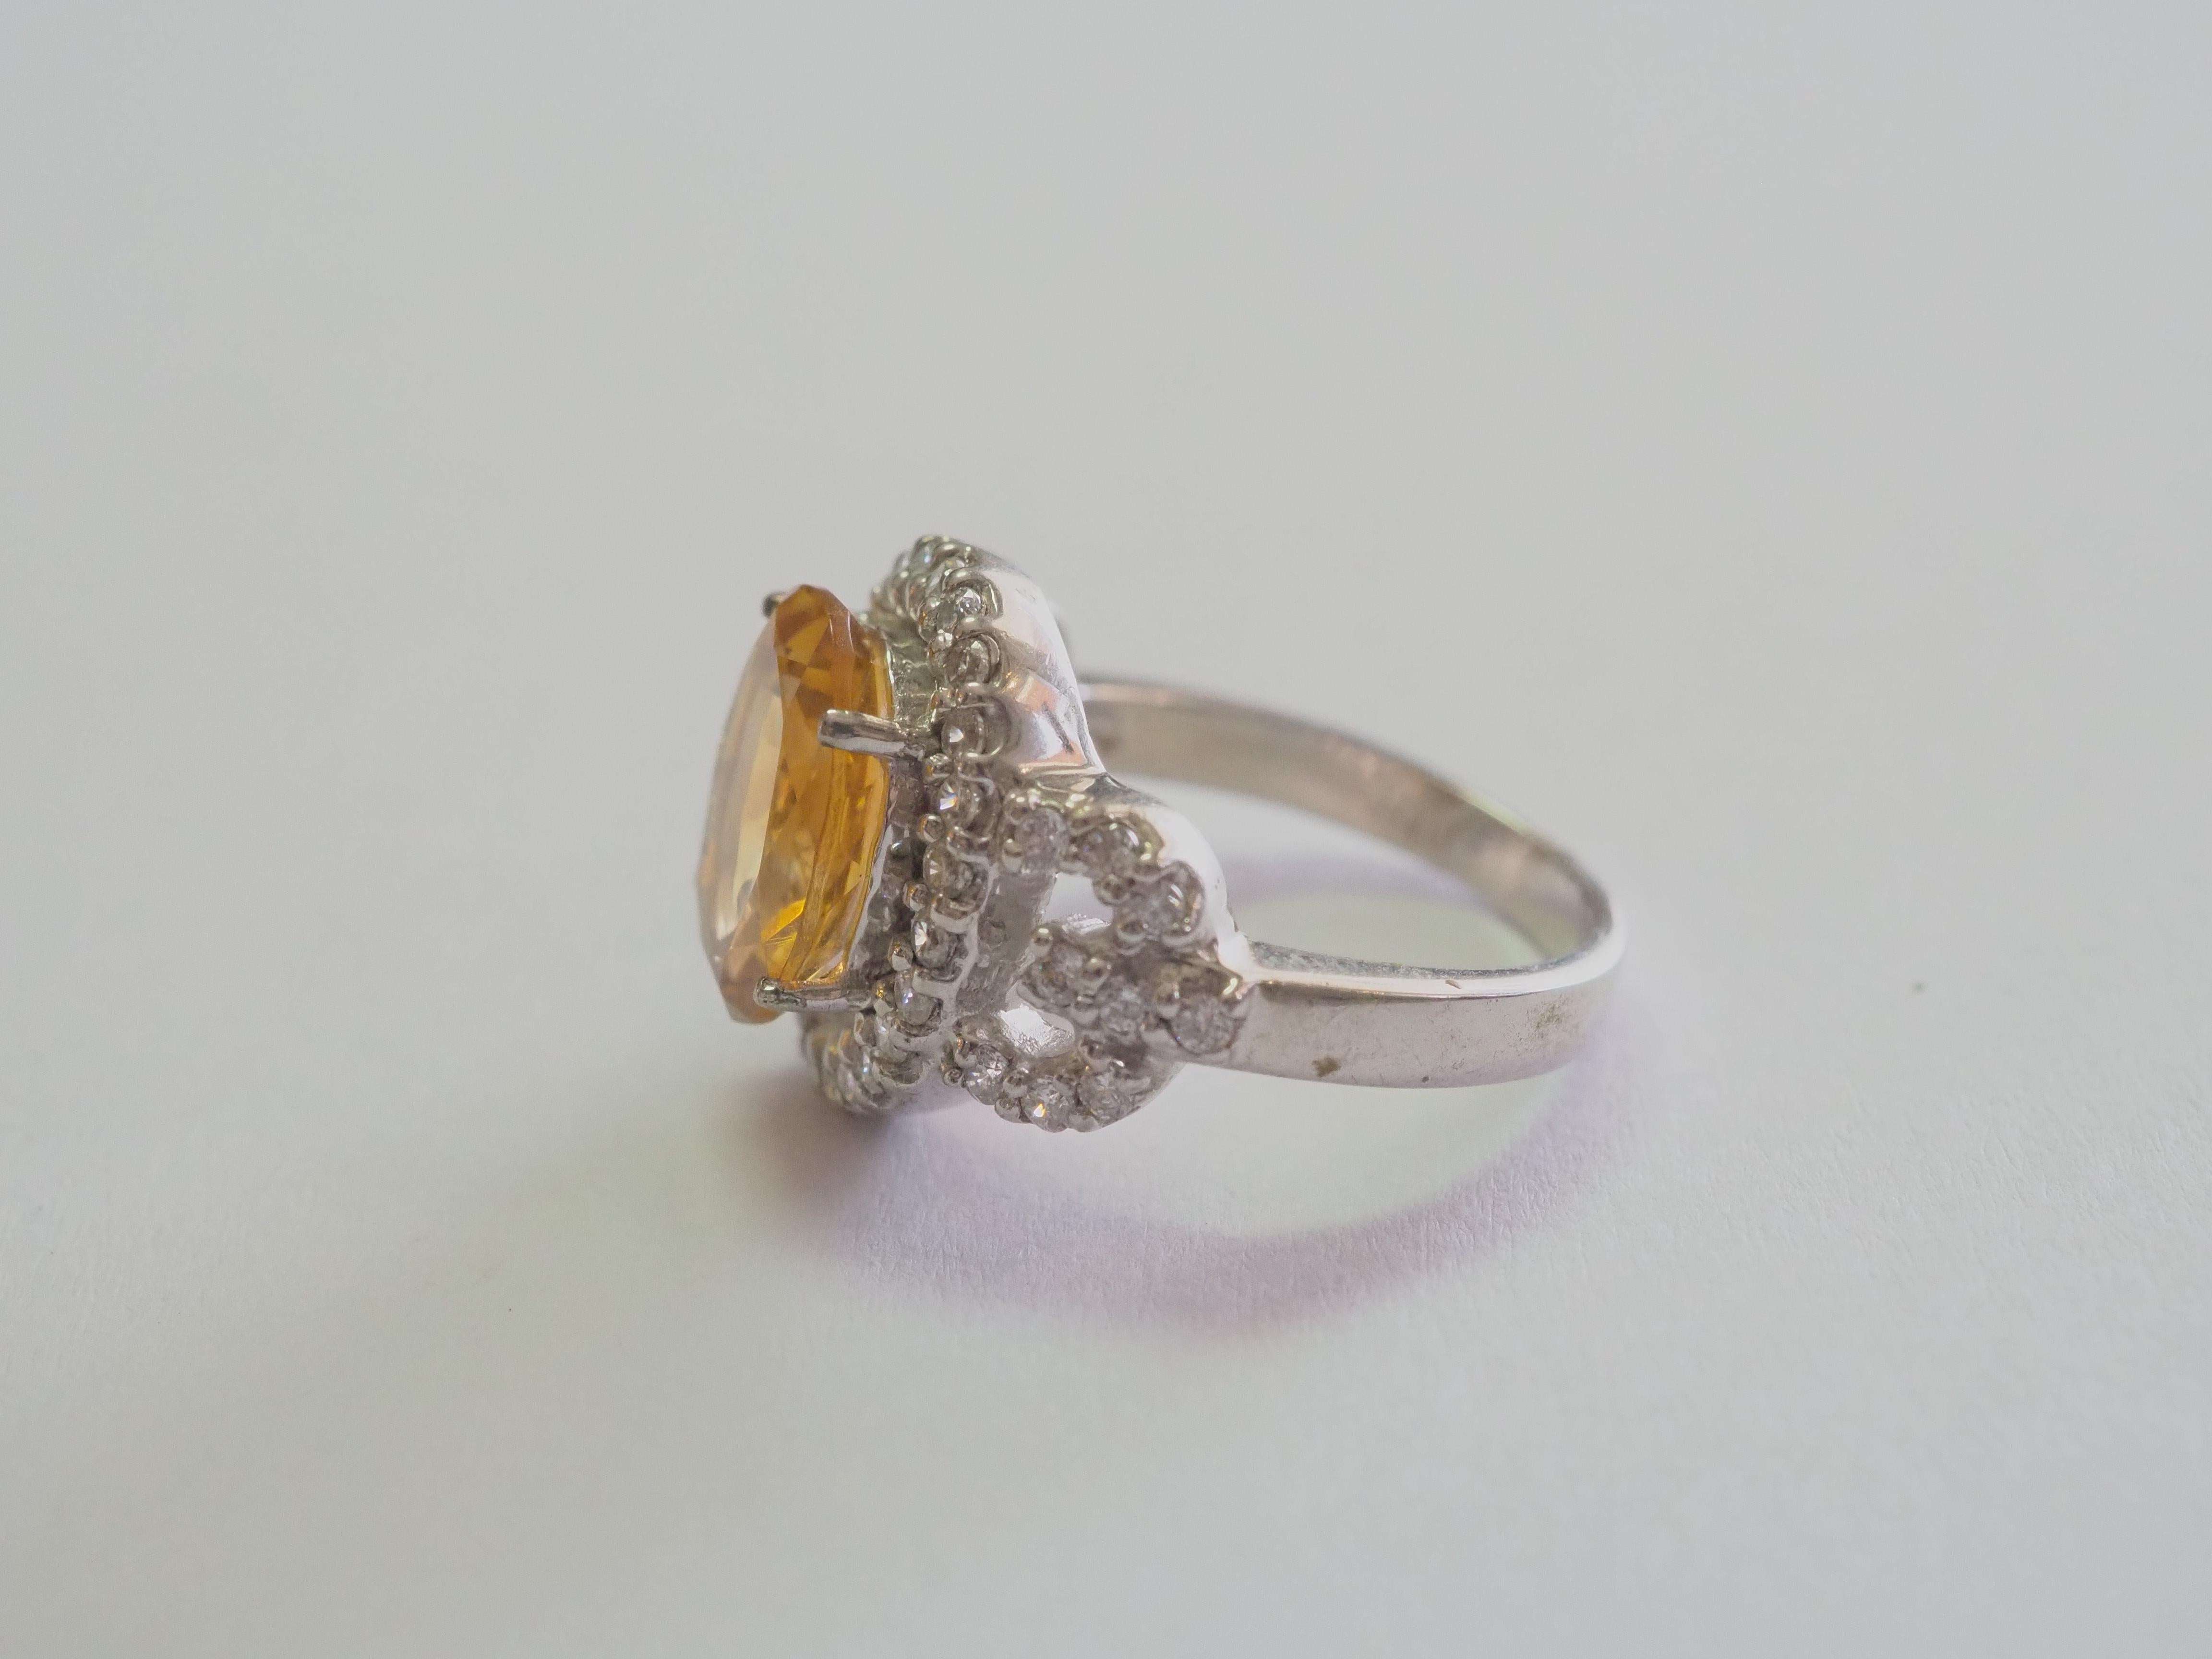 This ring is a beautiful and elegant cocktail ring in solid sterling silver. The ring is decorated by oval citrine prong set in the middle. The brilliant white stones surround the yellow gem are cubic zirconia. The citrine is very widely popular due